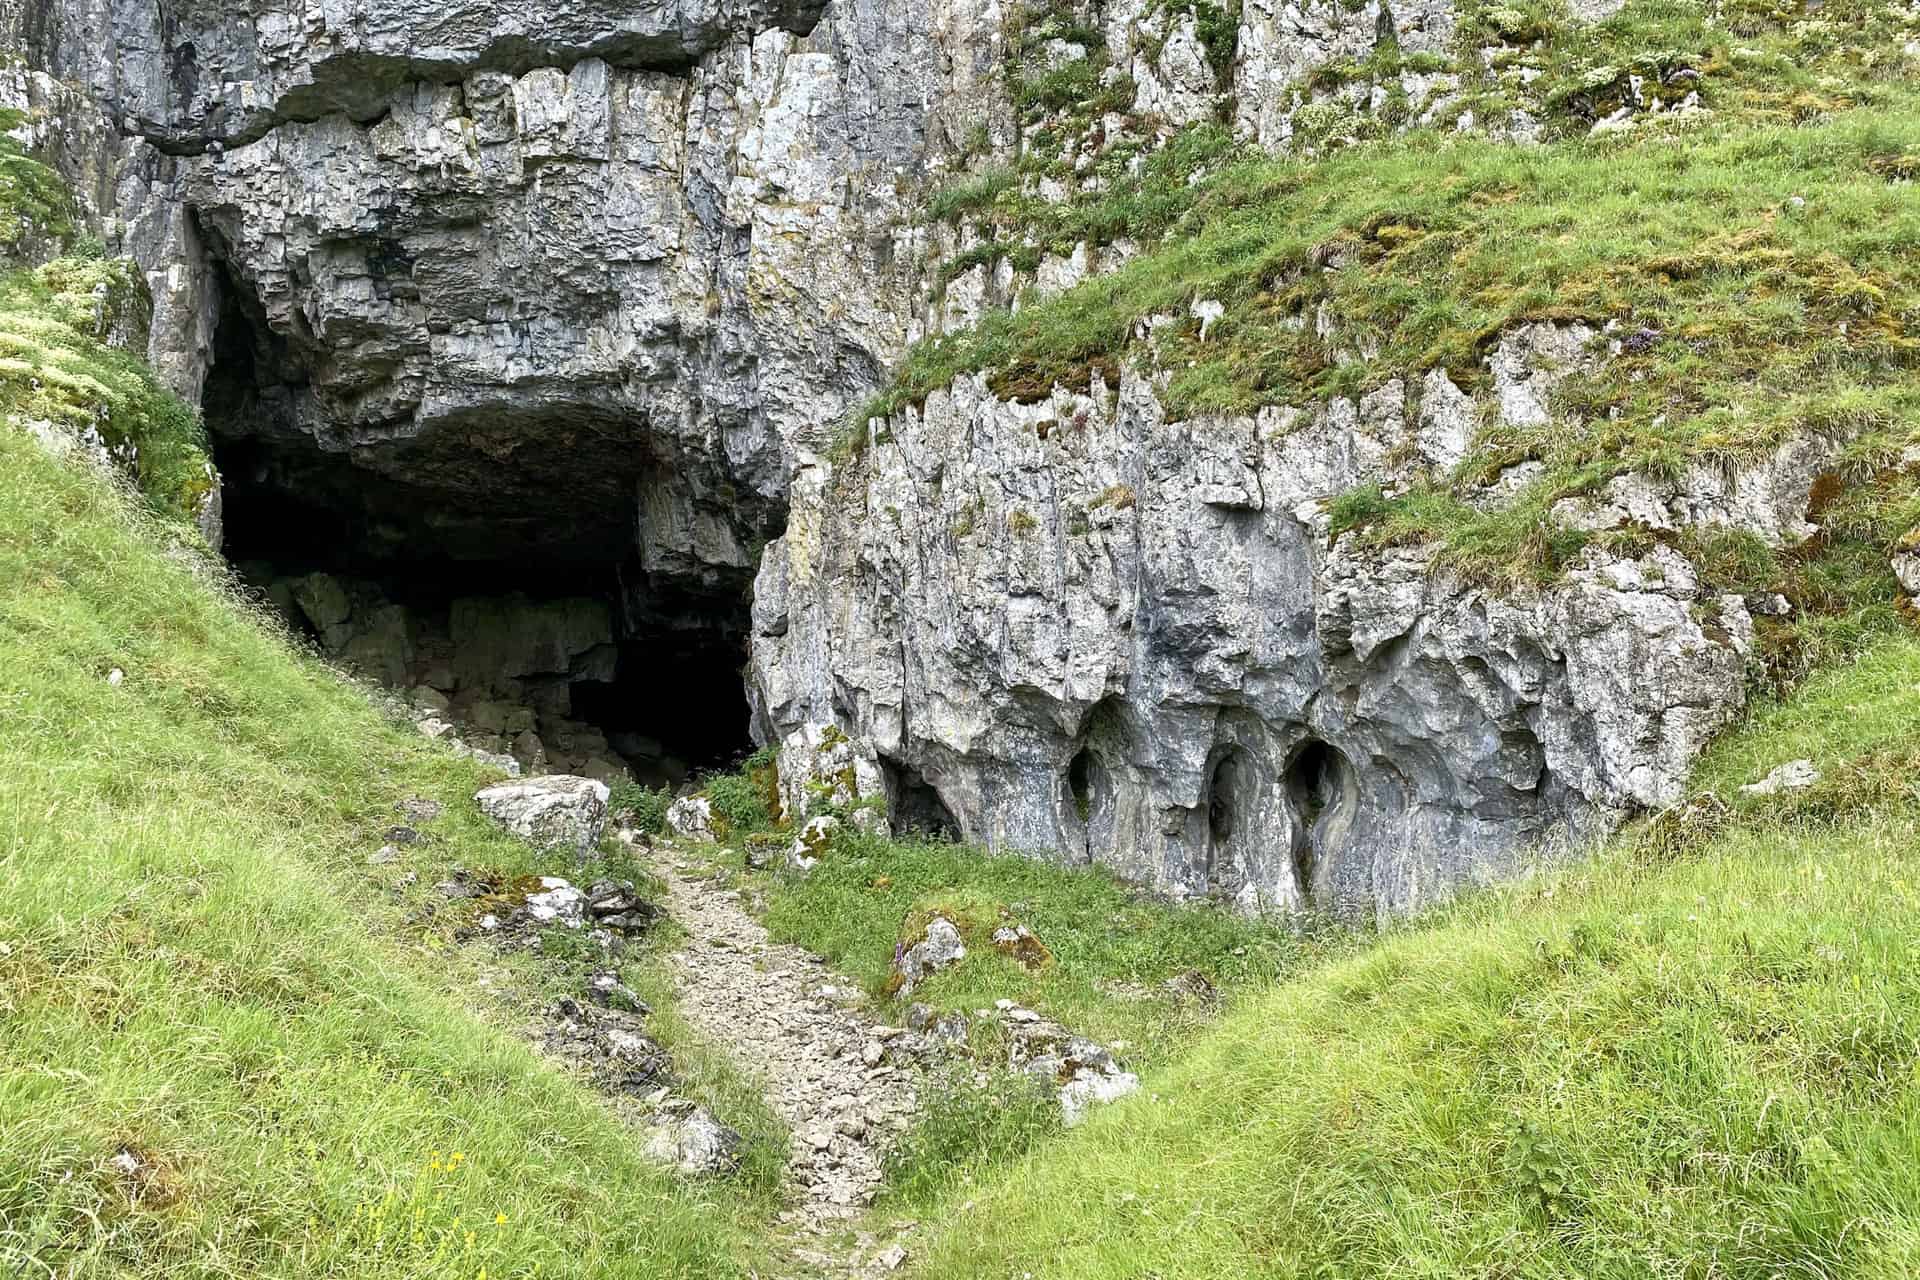 Victoria Cave just north of Brent Scar and Attermire Scar. From number 10 in my list of the best walks in the Yorkshire Dales.